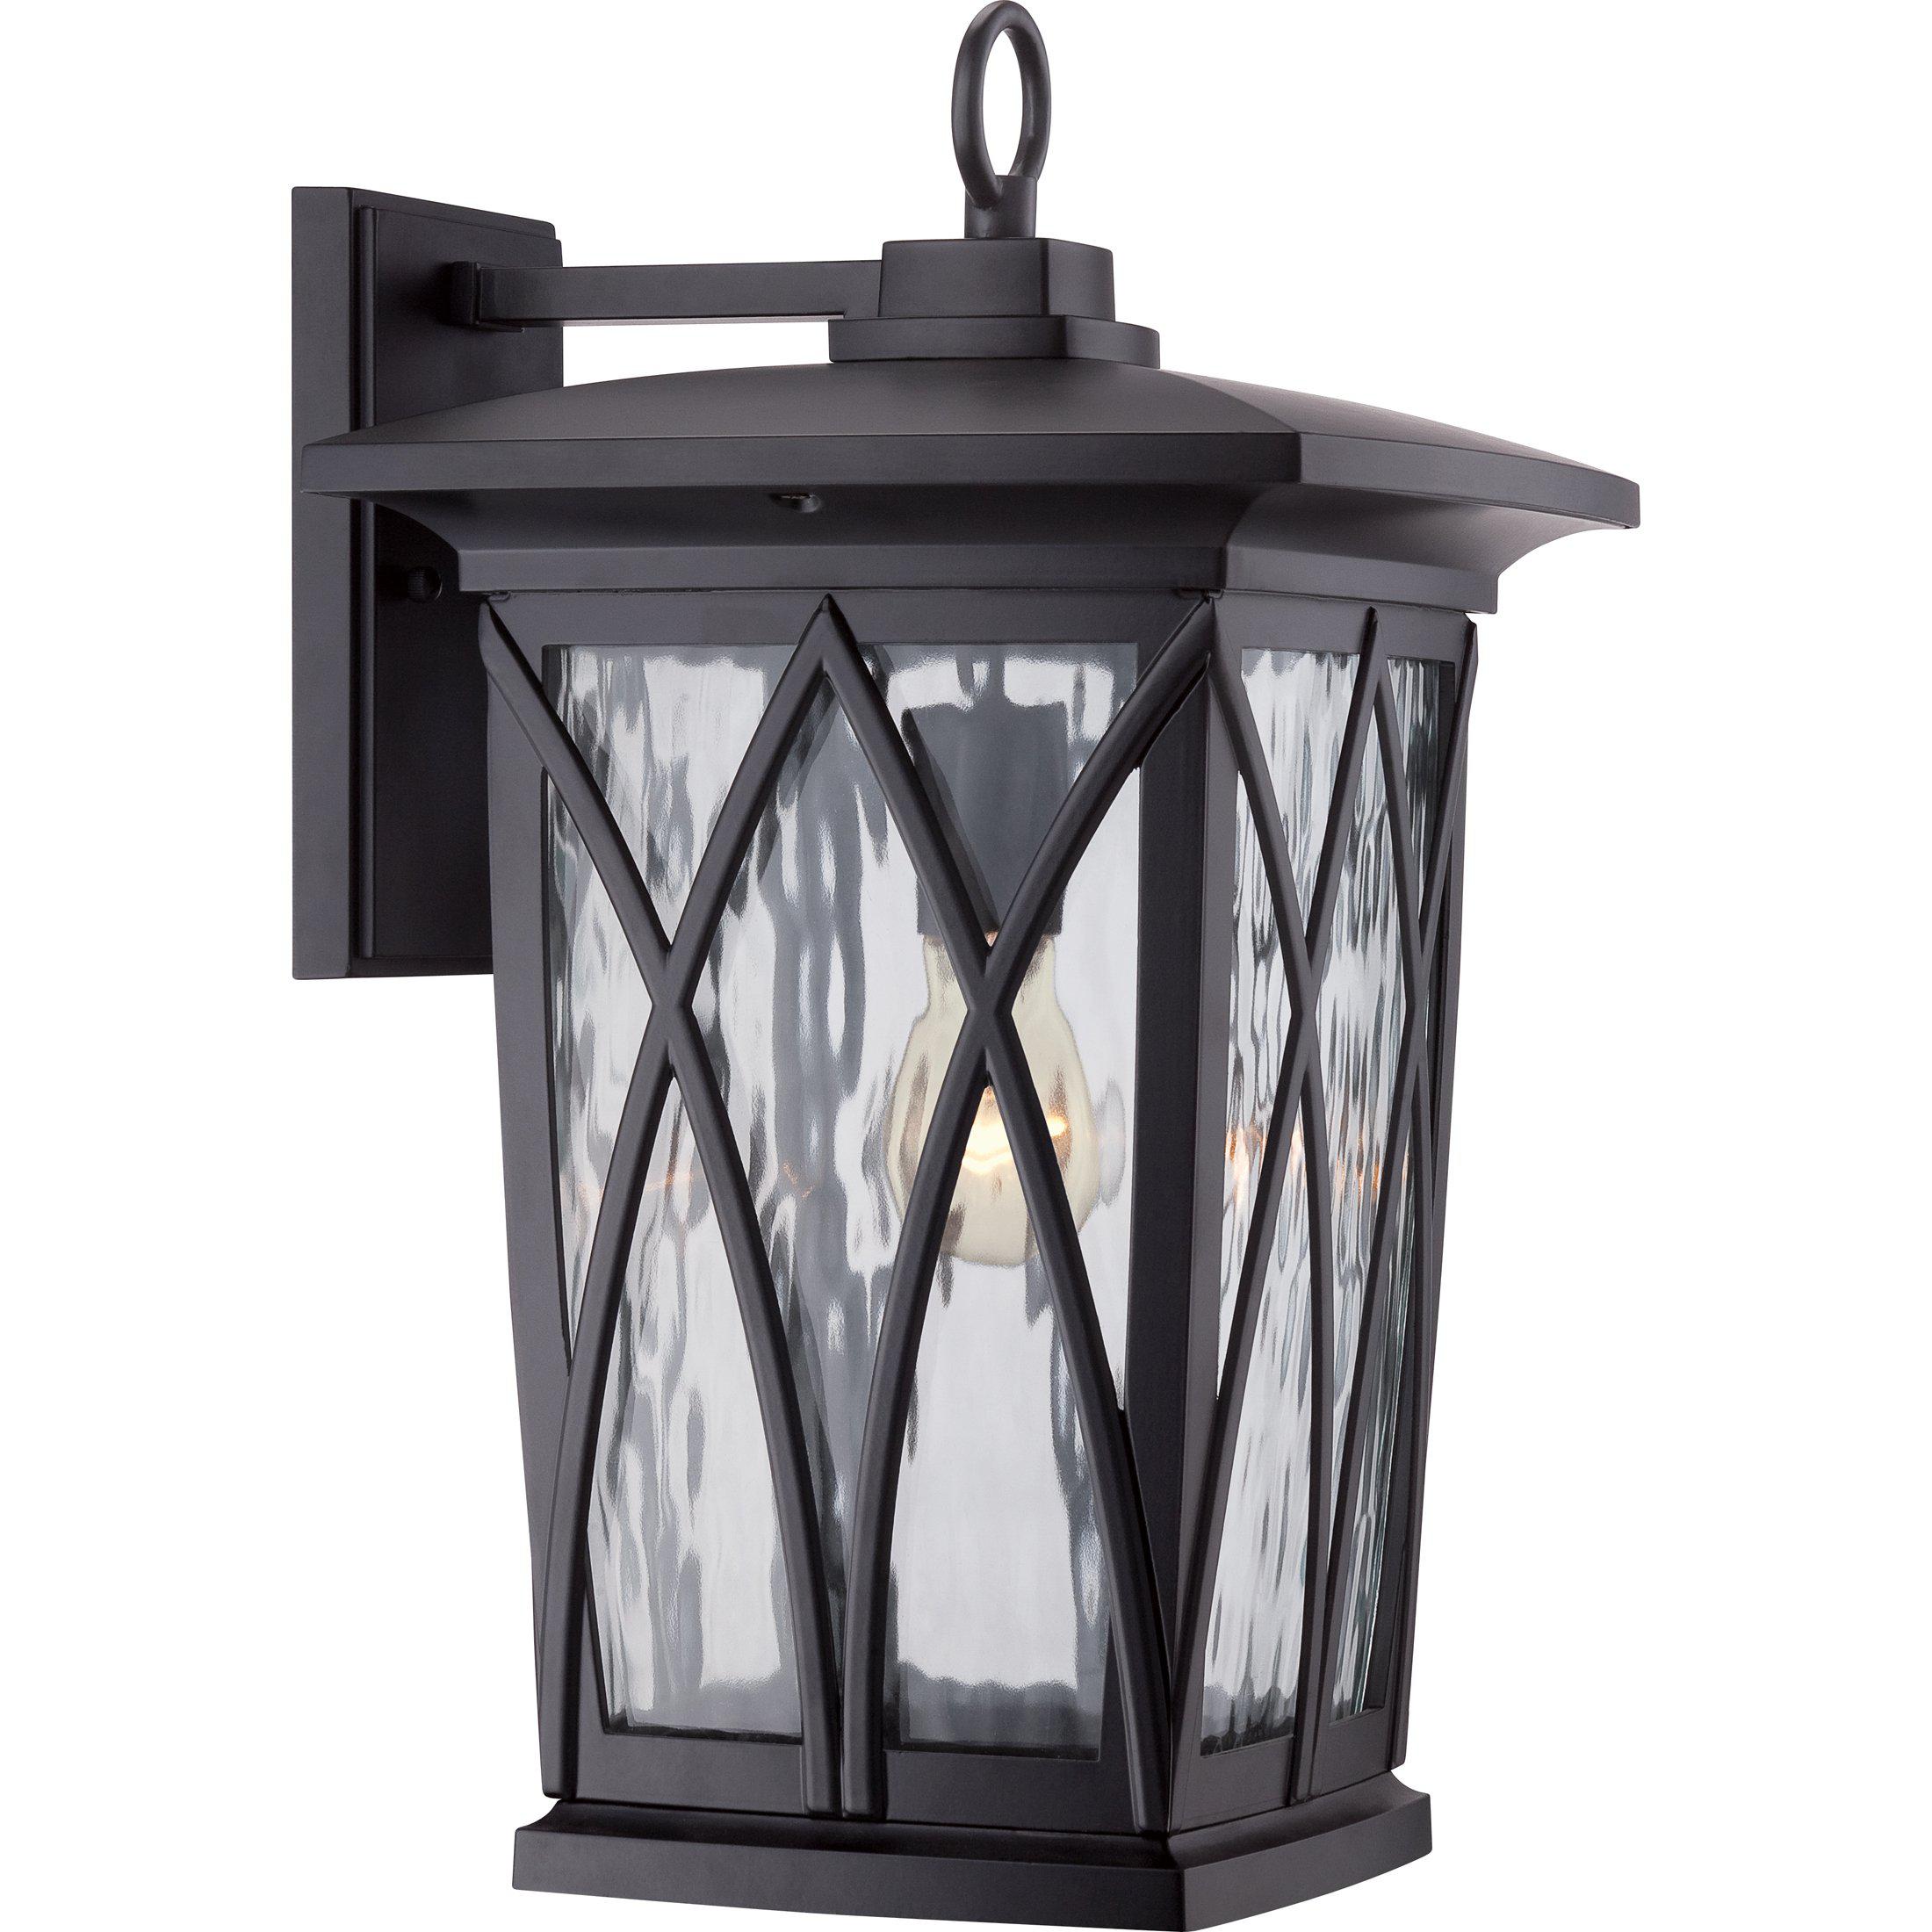 Quoizel  Grover Outdoor Lantern, Large Outdoor l Wall Quoizel Mystic Black  